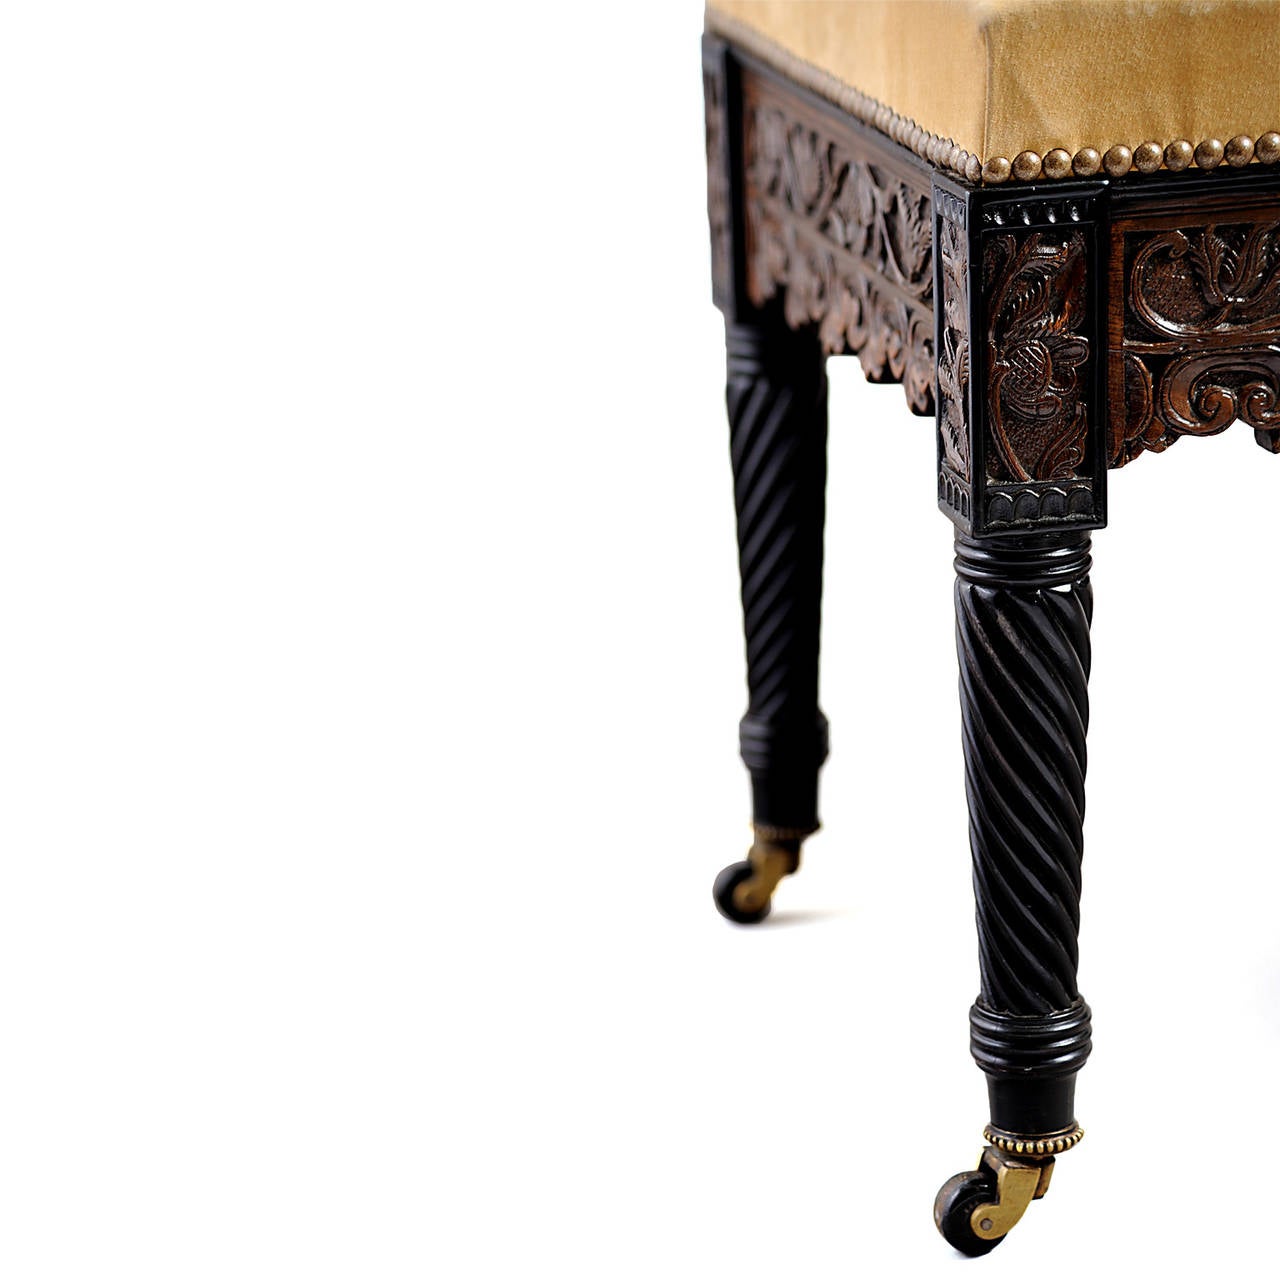 England, circa 1825-1830.

The rectangular close-nailed suede seat above a floral-carved hardwood frieze with framed corner blocks, over ebony wrythen-turned legs, with pipped brass caster-caps stamped COPES PATENT.

Conceived in the manner of